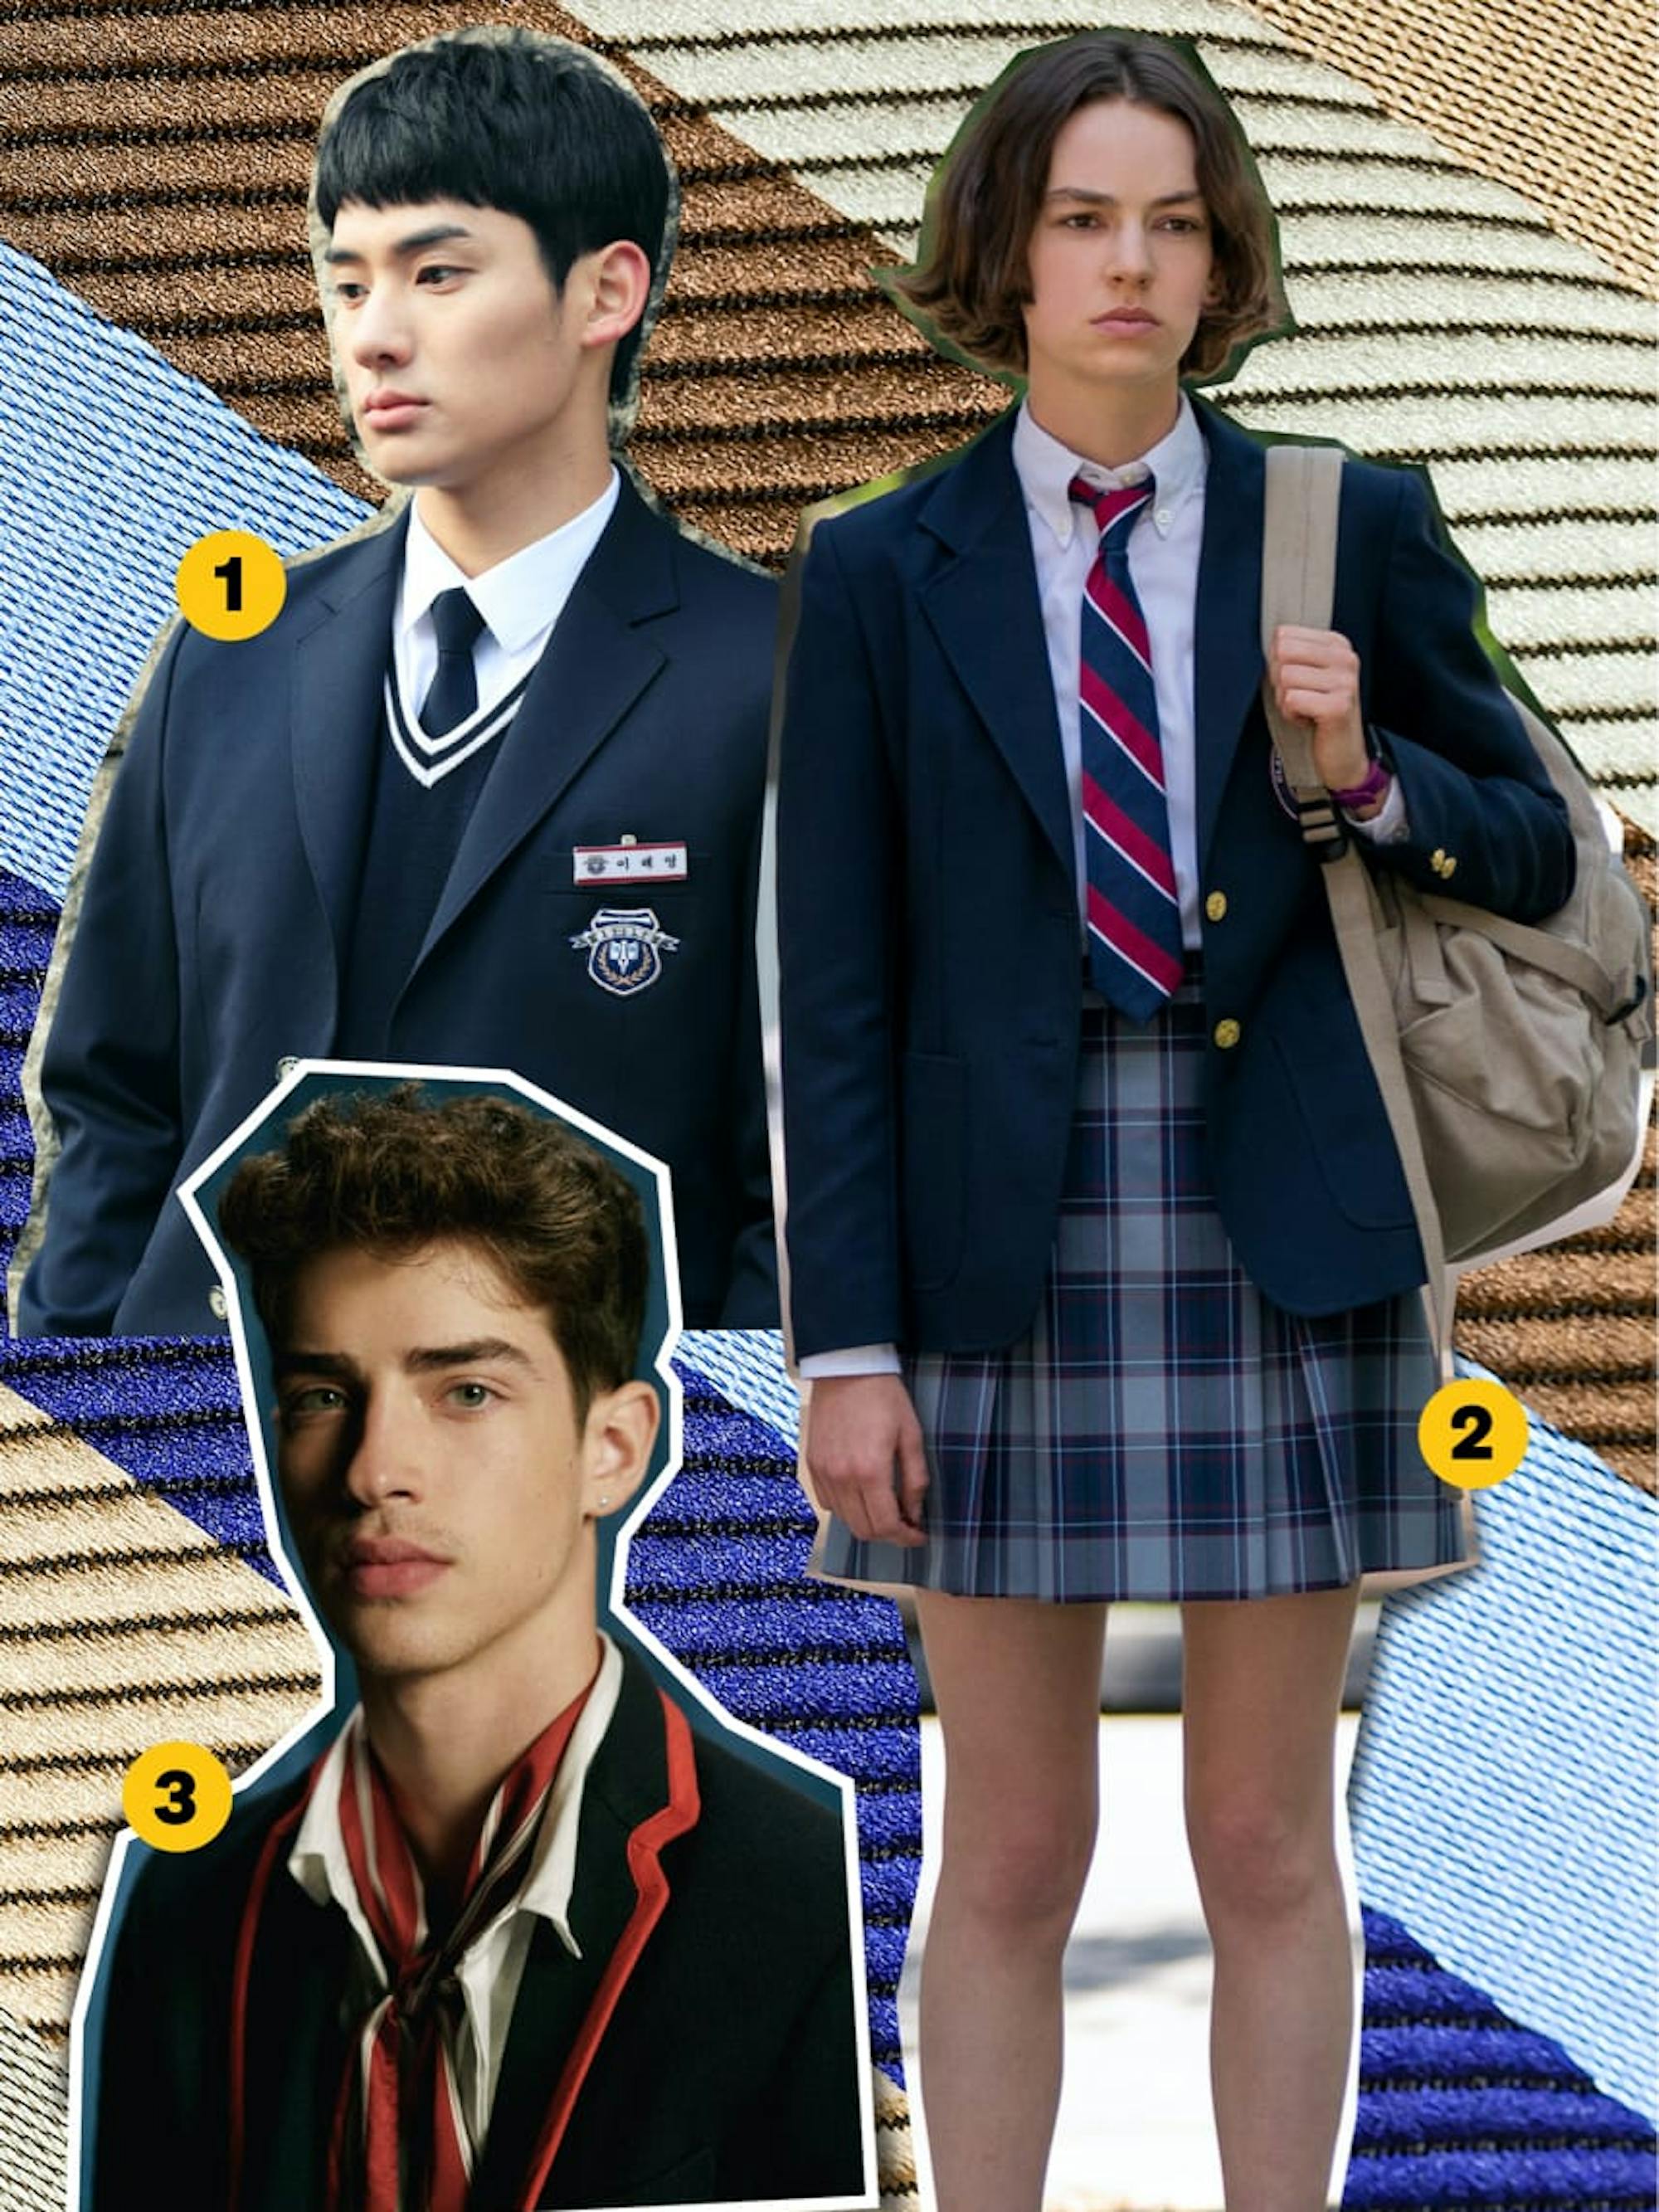 Jung Ga-ram (Love Alarm), Brigette Lundy-Paine (Atypical), and Manu Ríos (Elite) are wearing their characters’ school uniforms. Their pictures are cut out and collaged over a blue- and gold-striped, textured fabric.